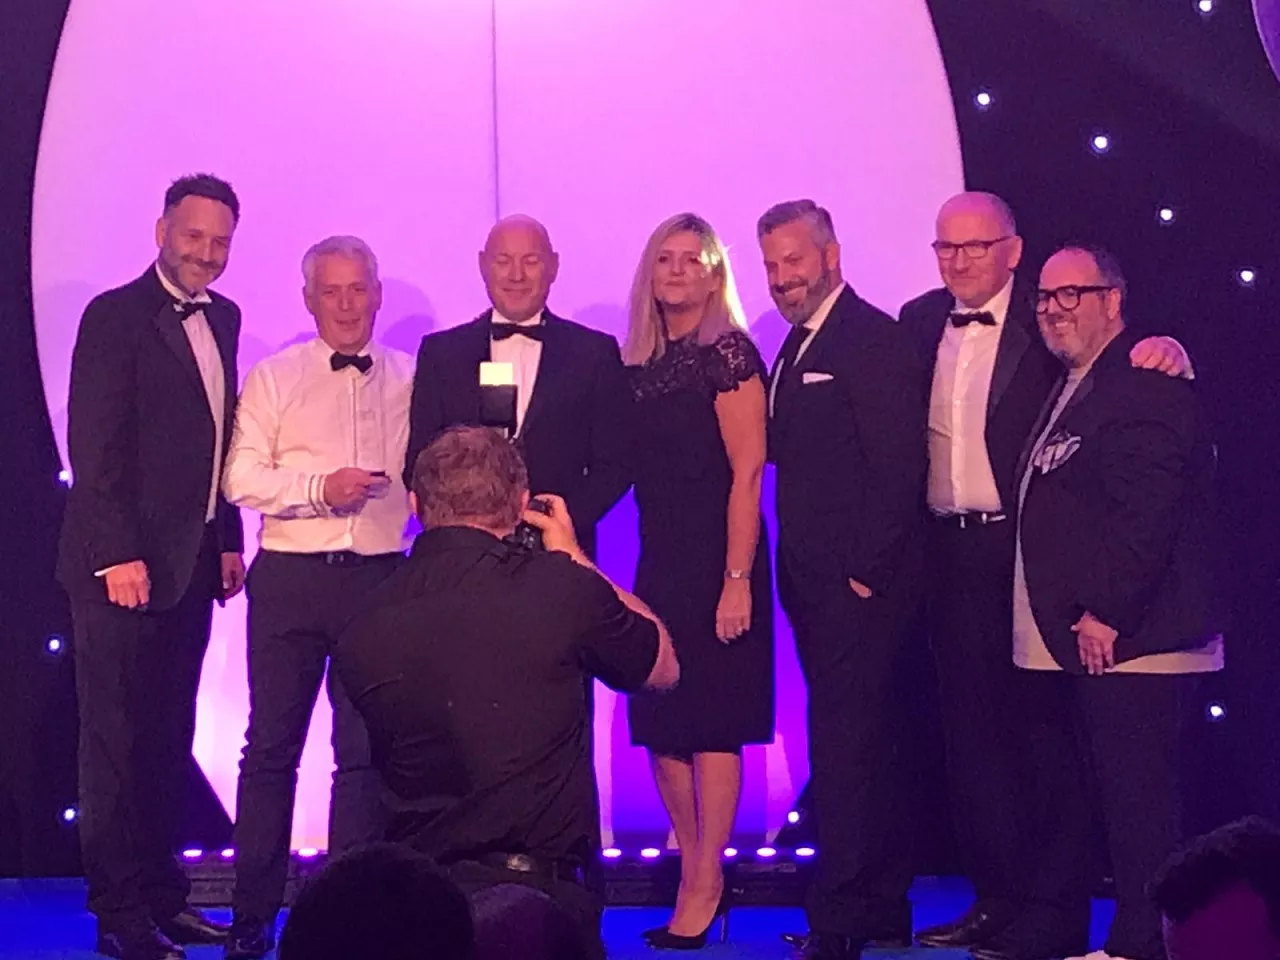 Star Refrigeration Named Refrigeration Contractor of the Year at the TCS&D Awards 2021